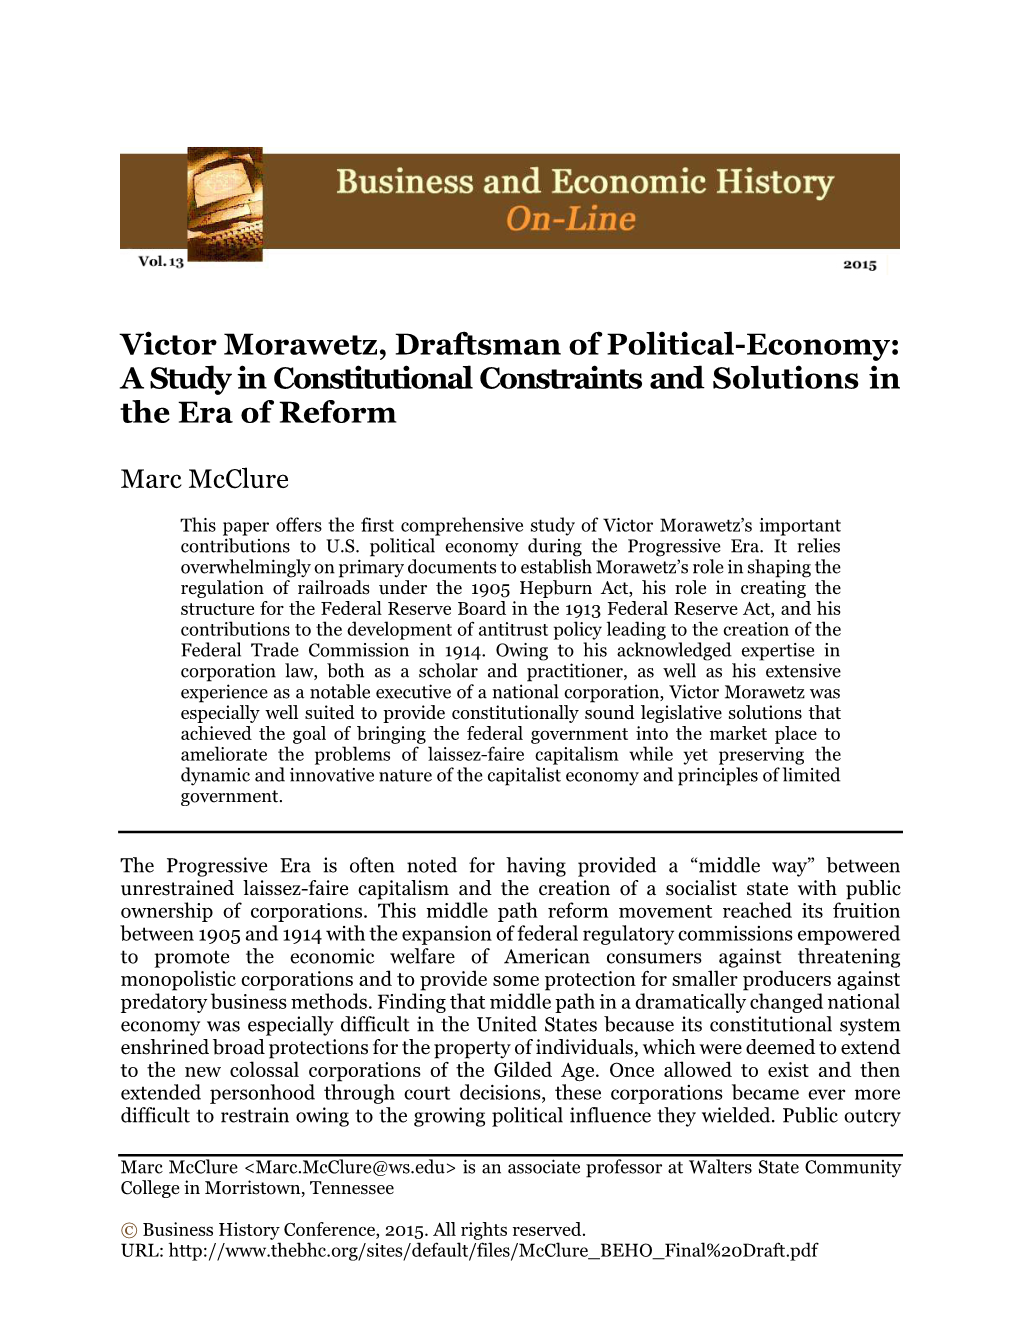 Victor Morawetz, Draftsman of Political-Economy: a Study in Constitutional Constraints and Solutions in the Era of Reform